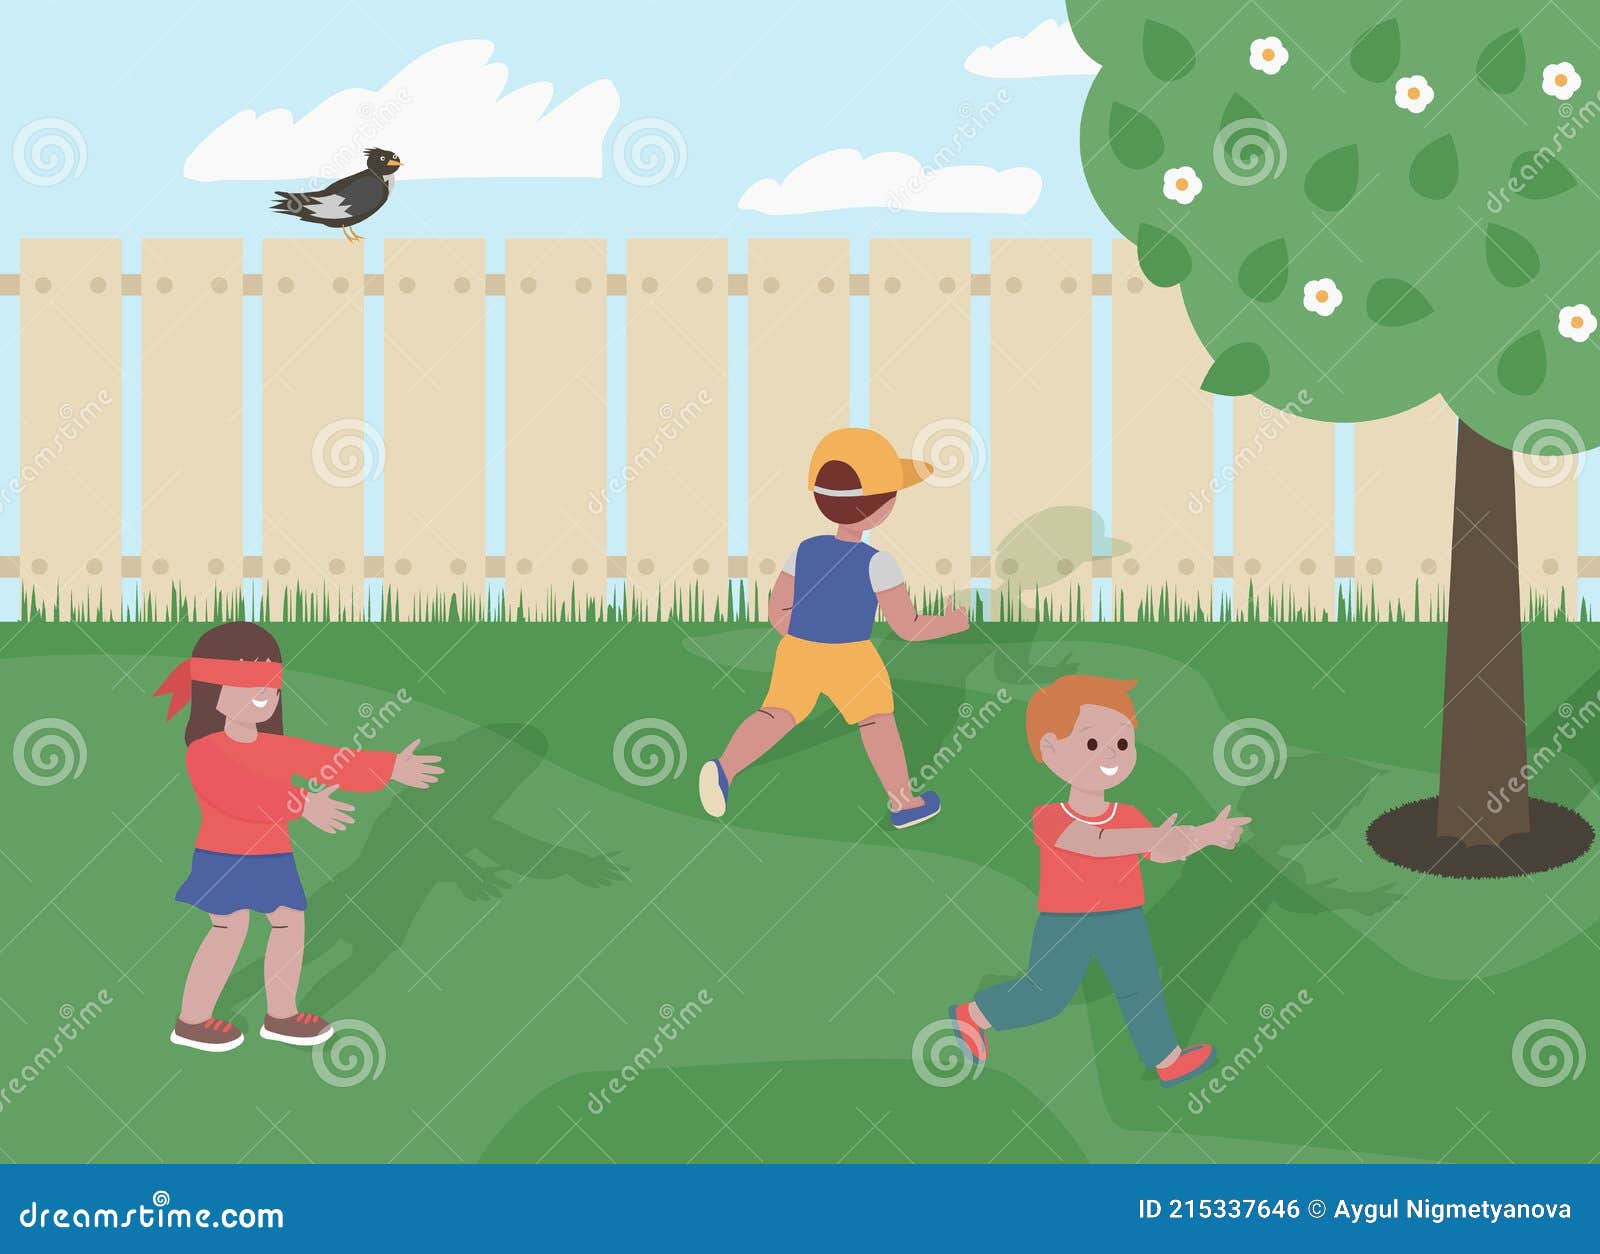 Hide and seek game playing kids together Vector Image